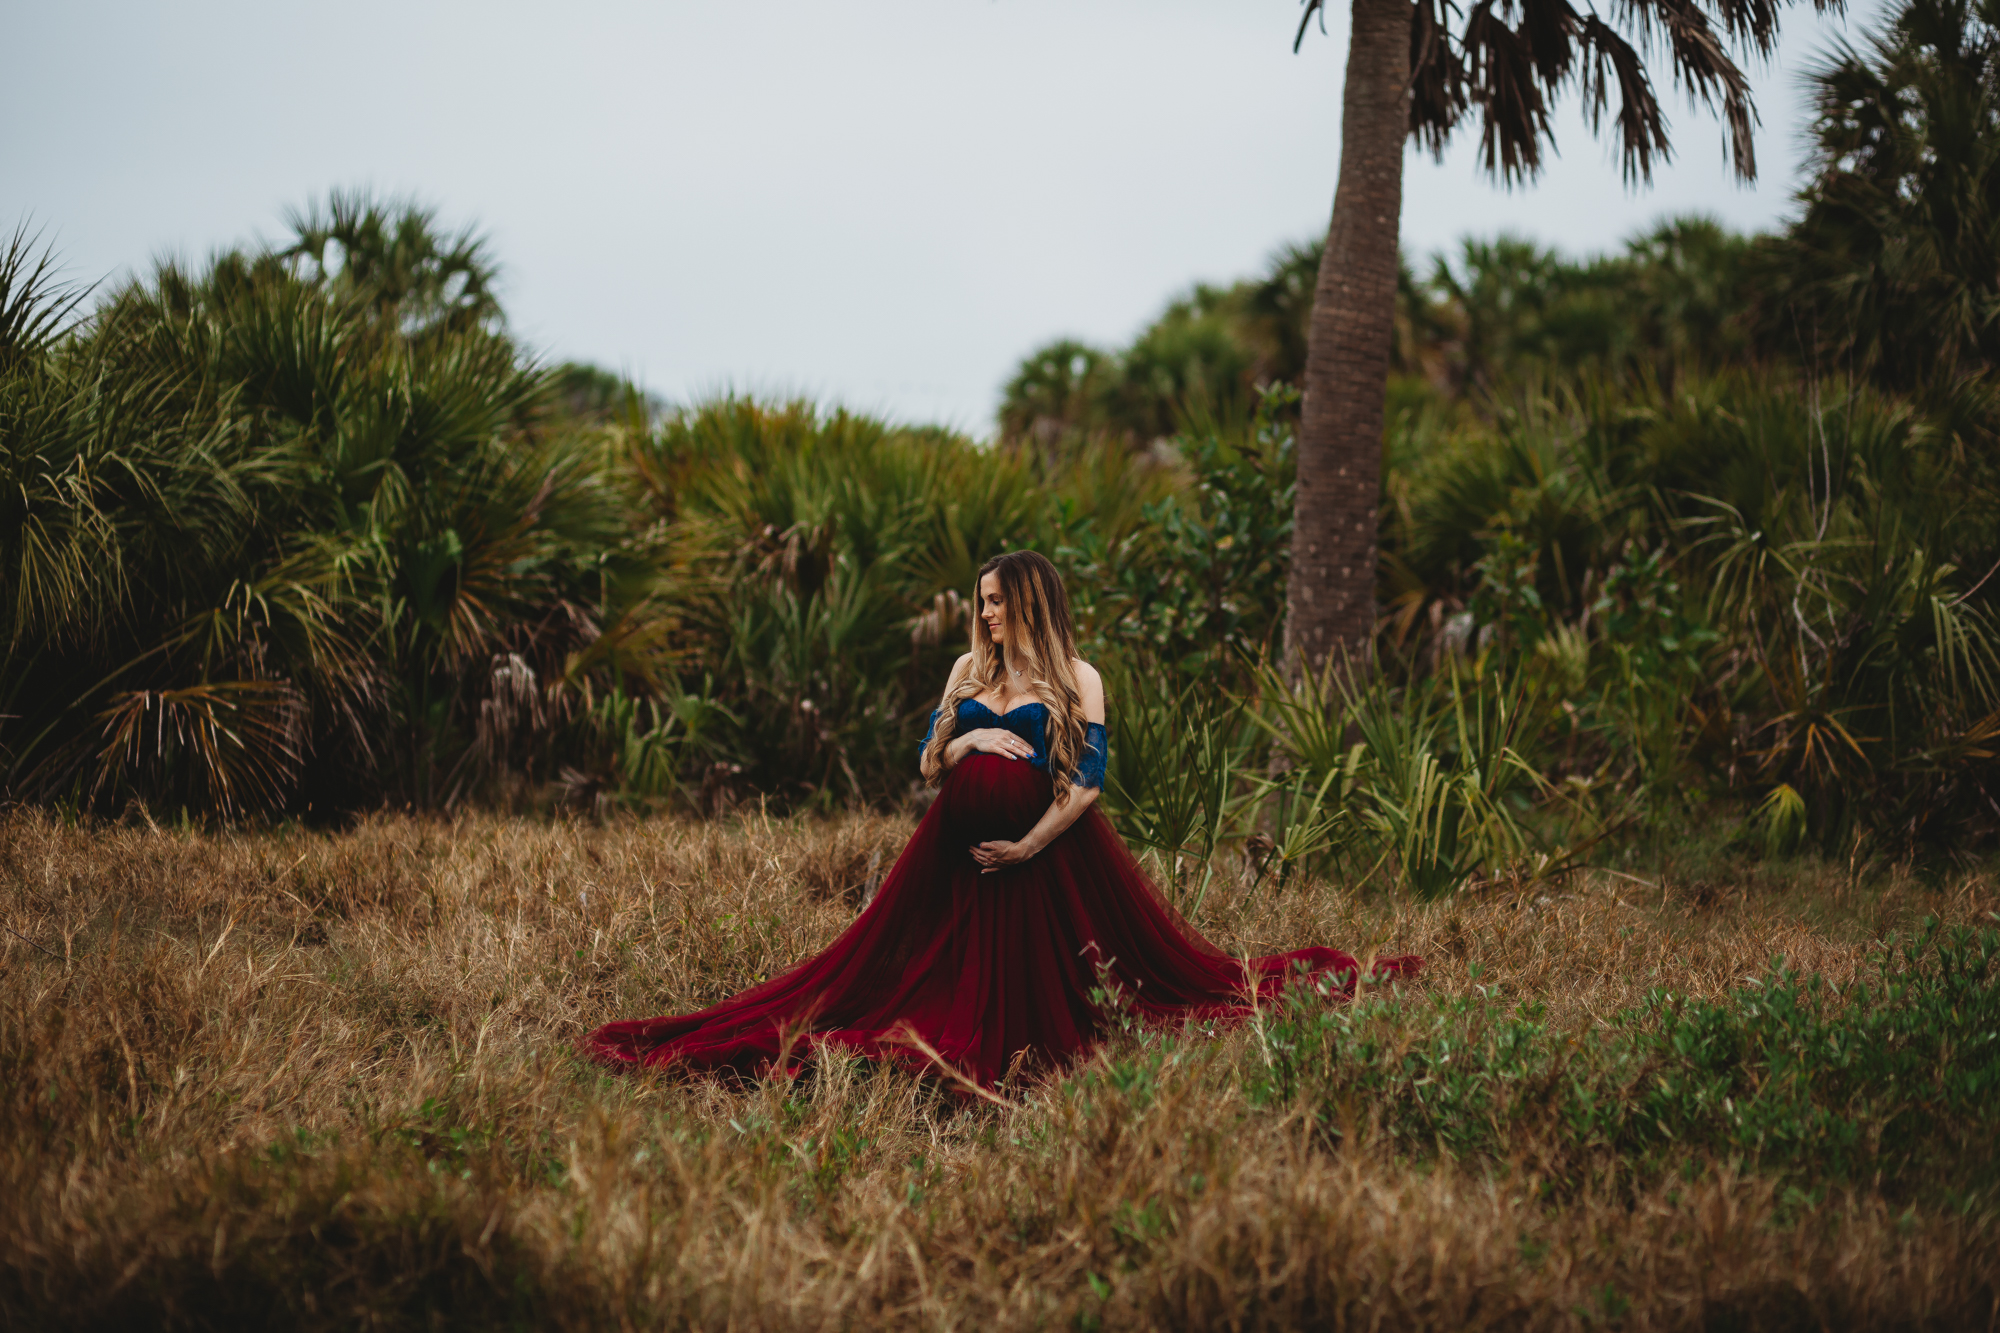 pregnancy photo session at the beach, tampa maternity photographer 